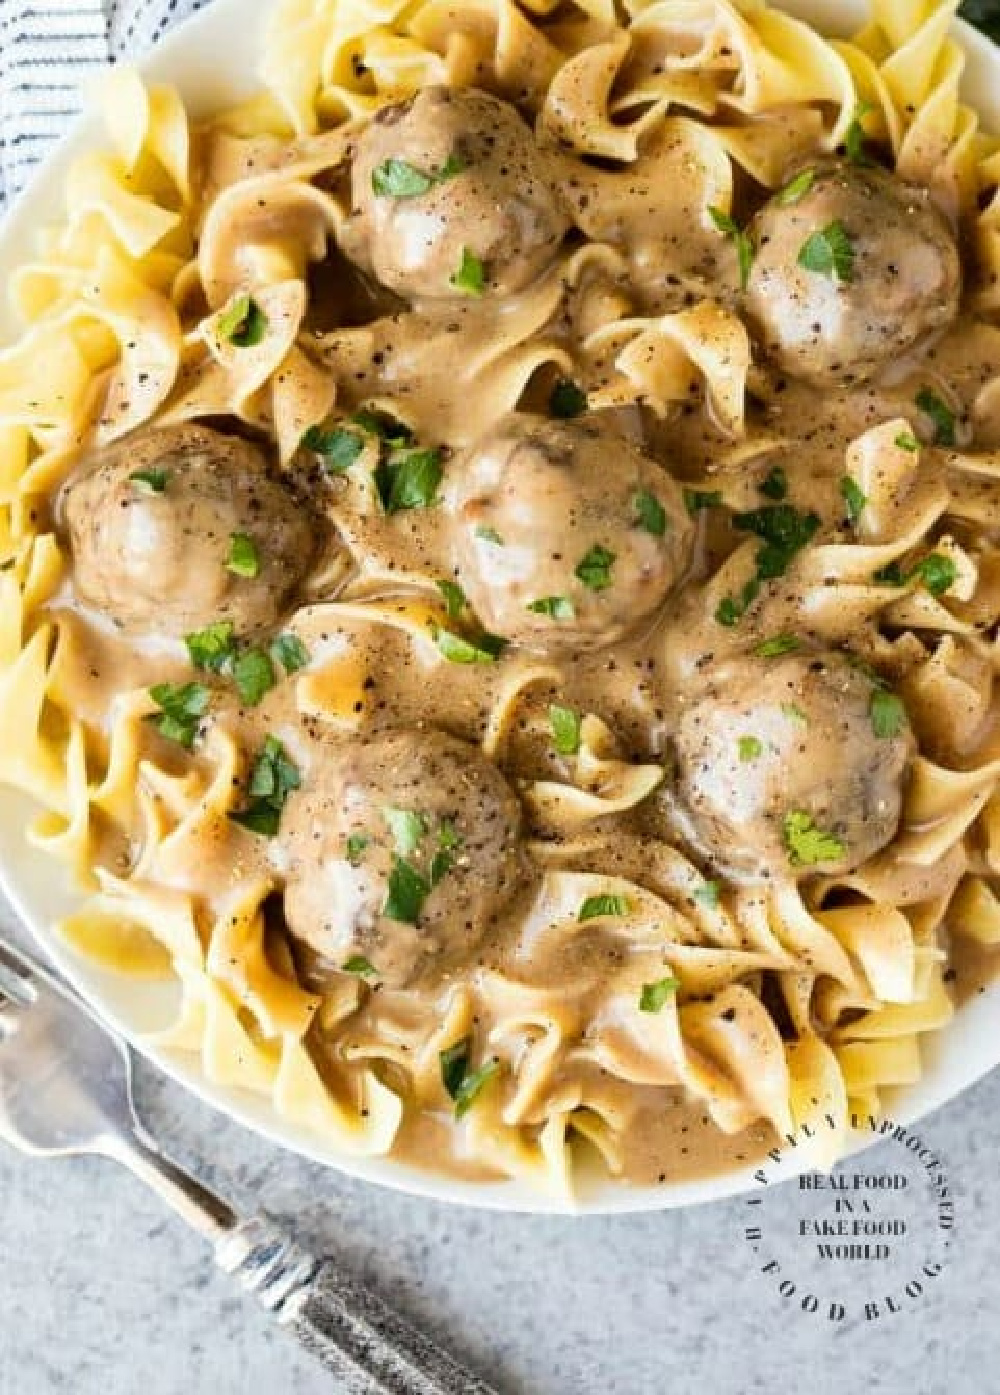 Swedish meatballs in a creamy sauce over egg noodles garnished with parsley